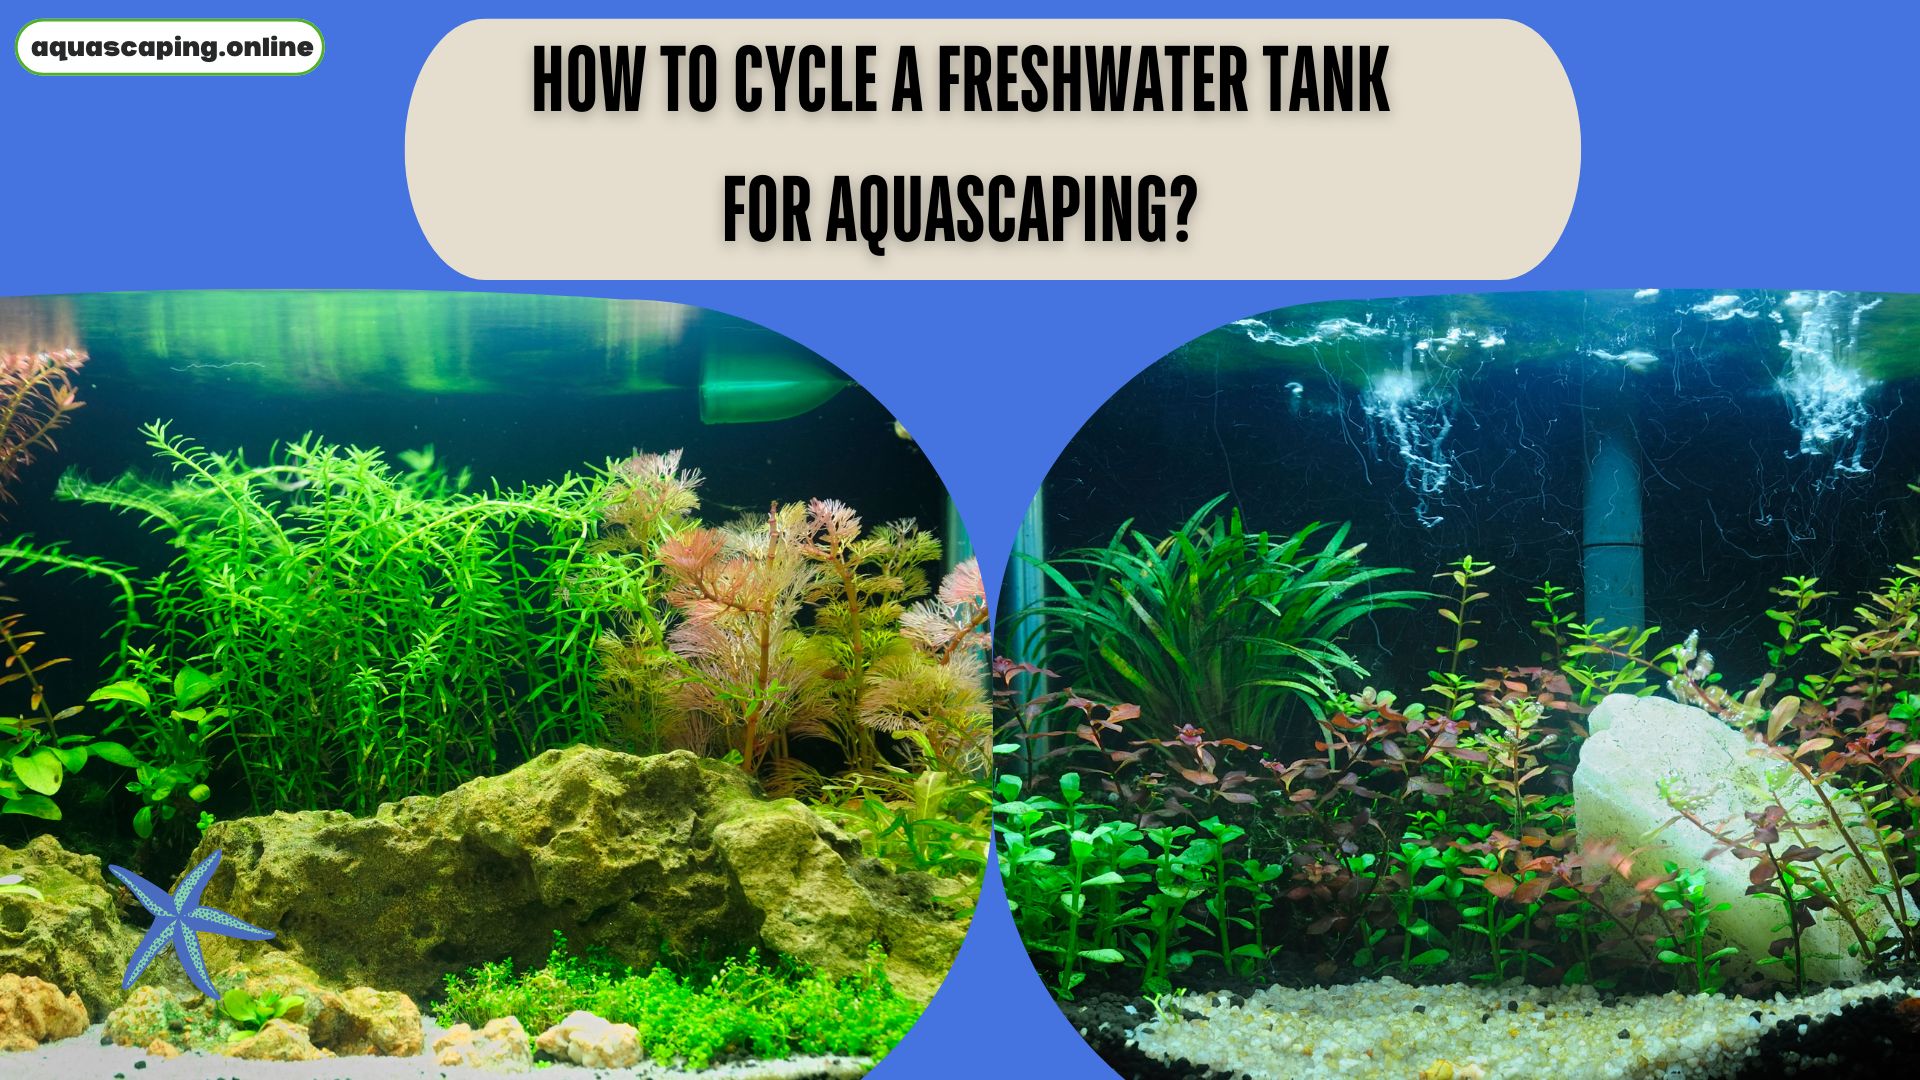 Cycle a freshwater tank for aquascaping